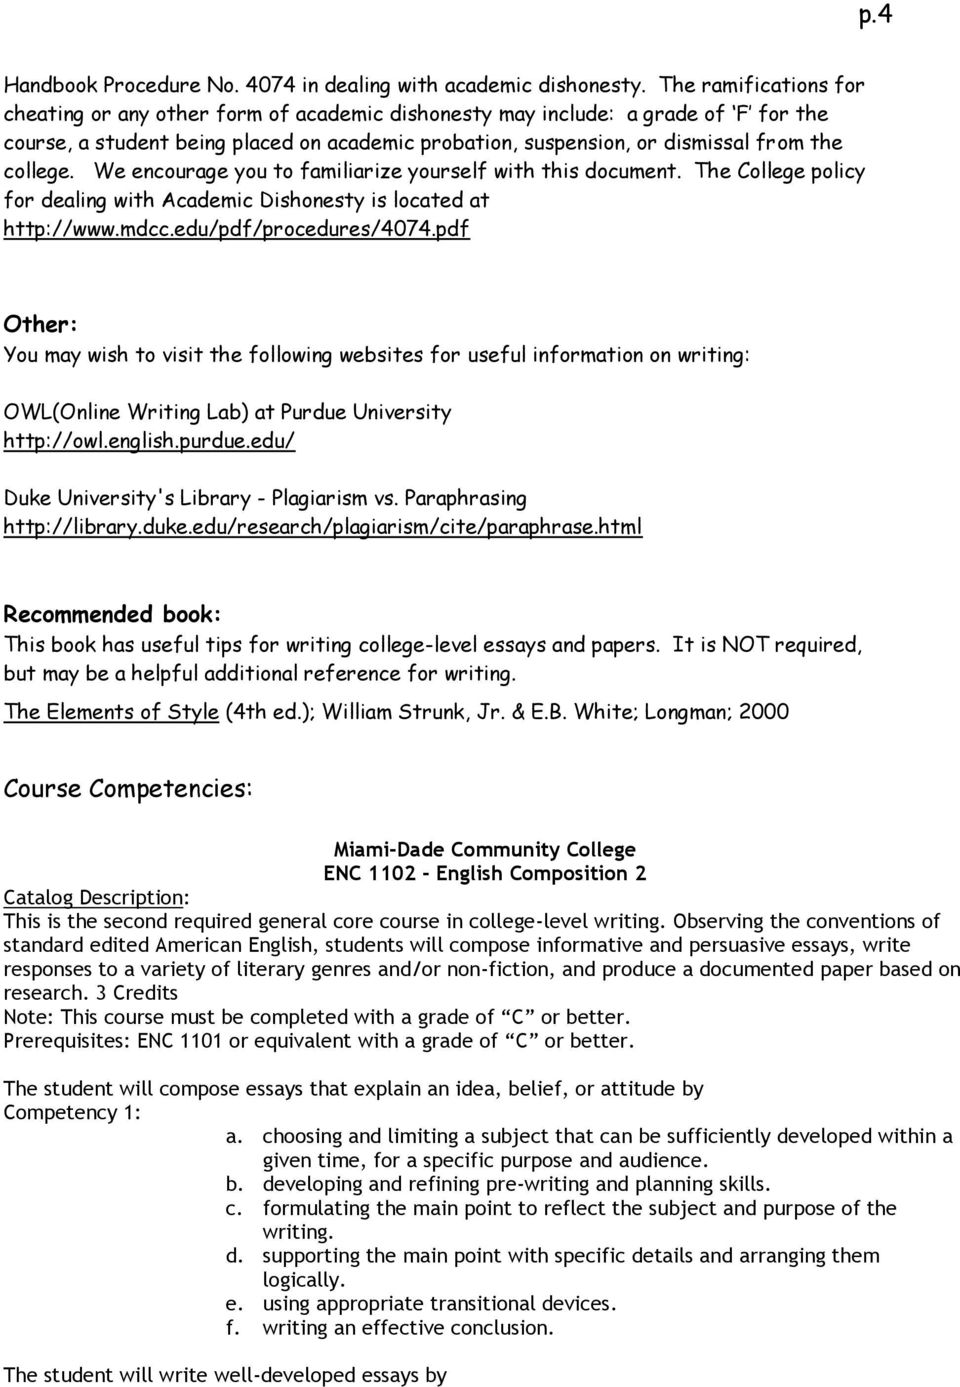 college. We encourage you to familiarize yourself with this document. The College policy for dealing with Academic Dishonesty is located at http://www.mdcc.edu/pdf/procedures/4074.